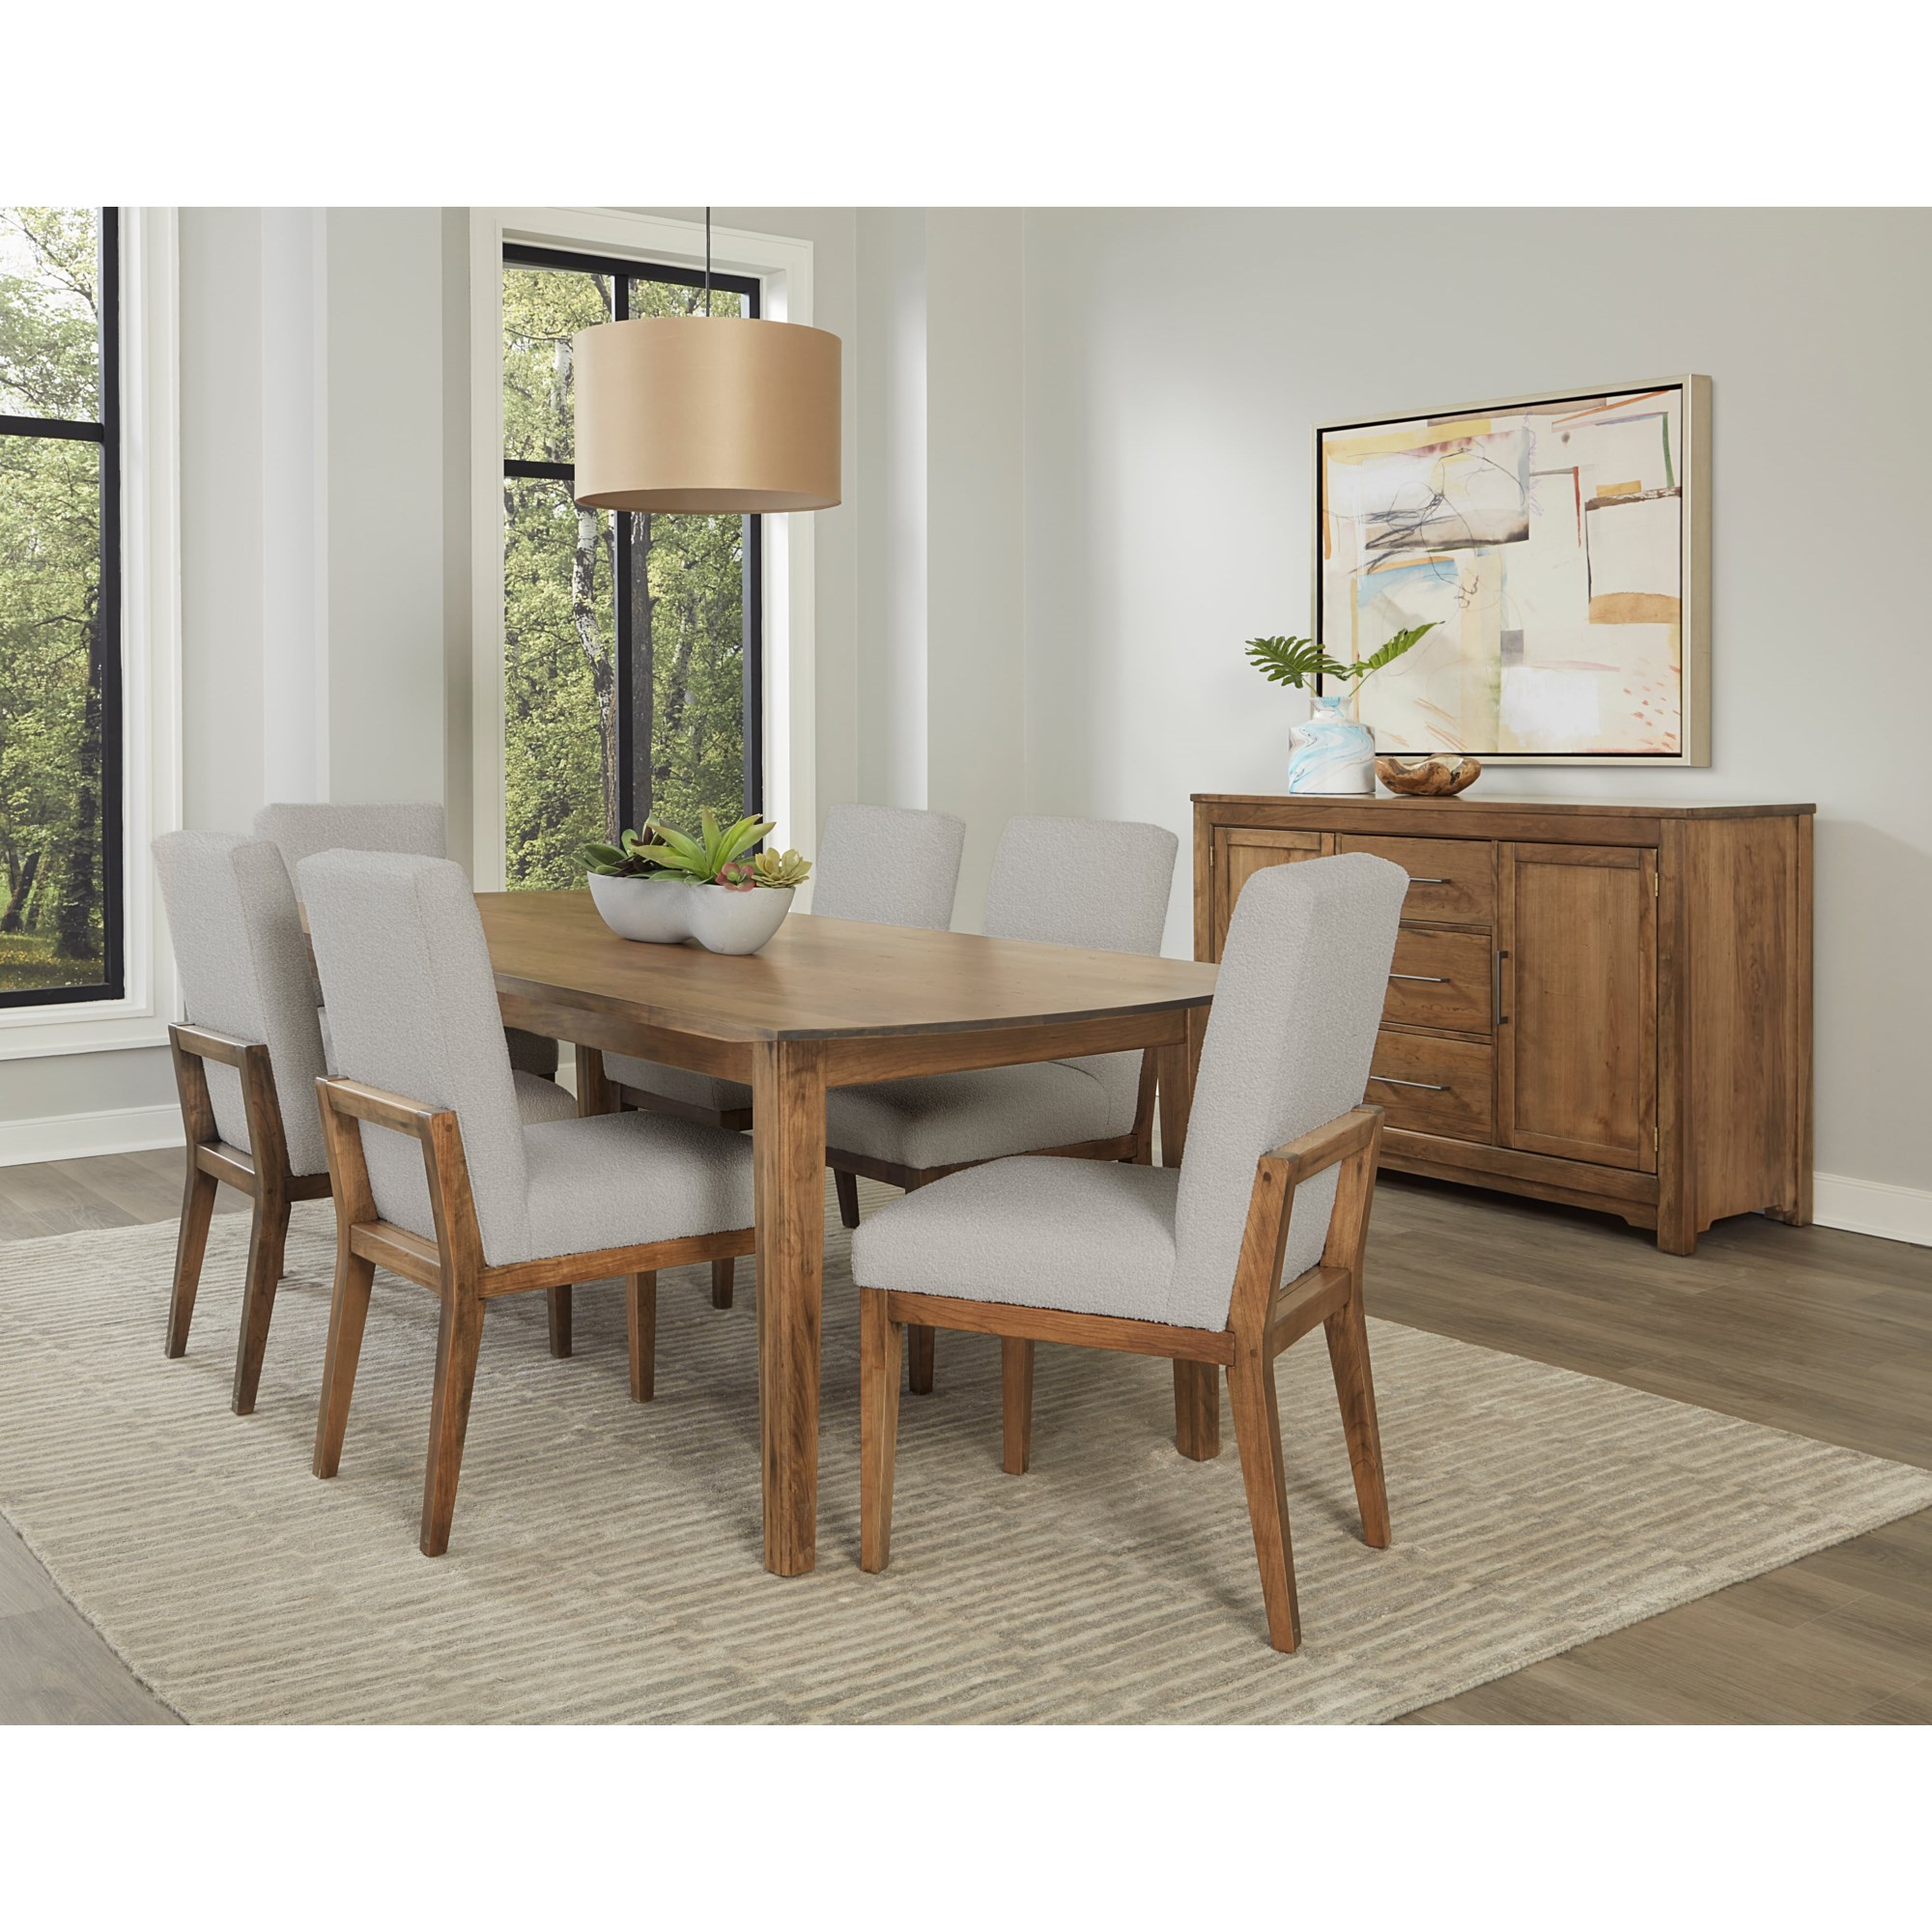 Vaughan Bassett Chairs Cherry Side Chair Squirrel | - Dining - Furniture | Upholstered 151-030B Dining Brown Chair Crafted Side Contemporary Medium